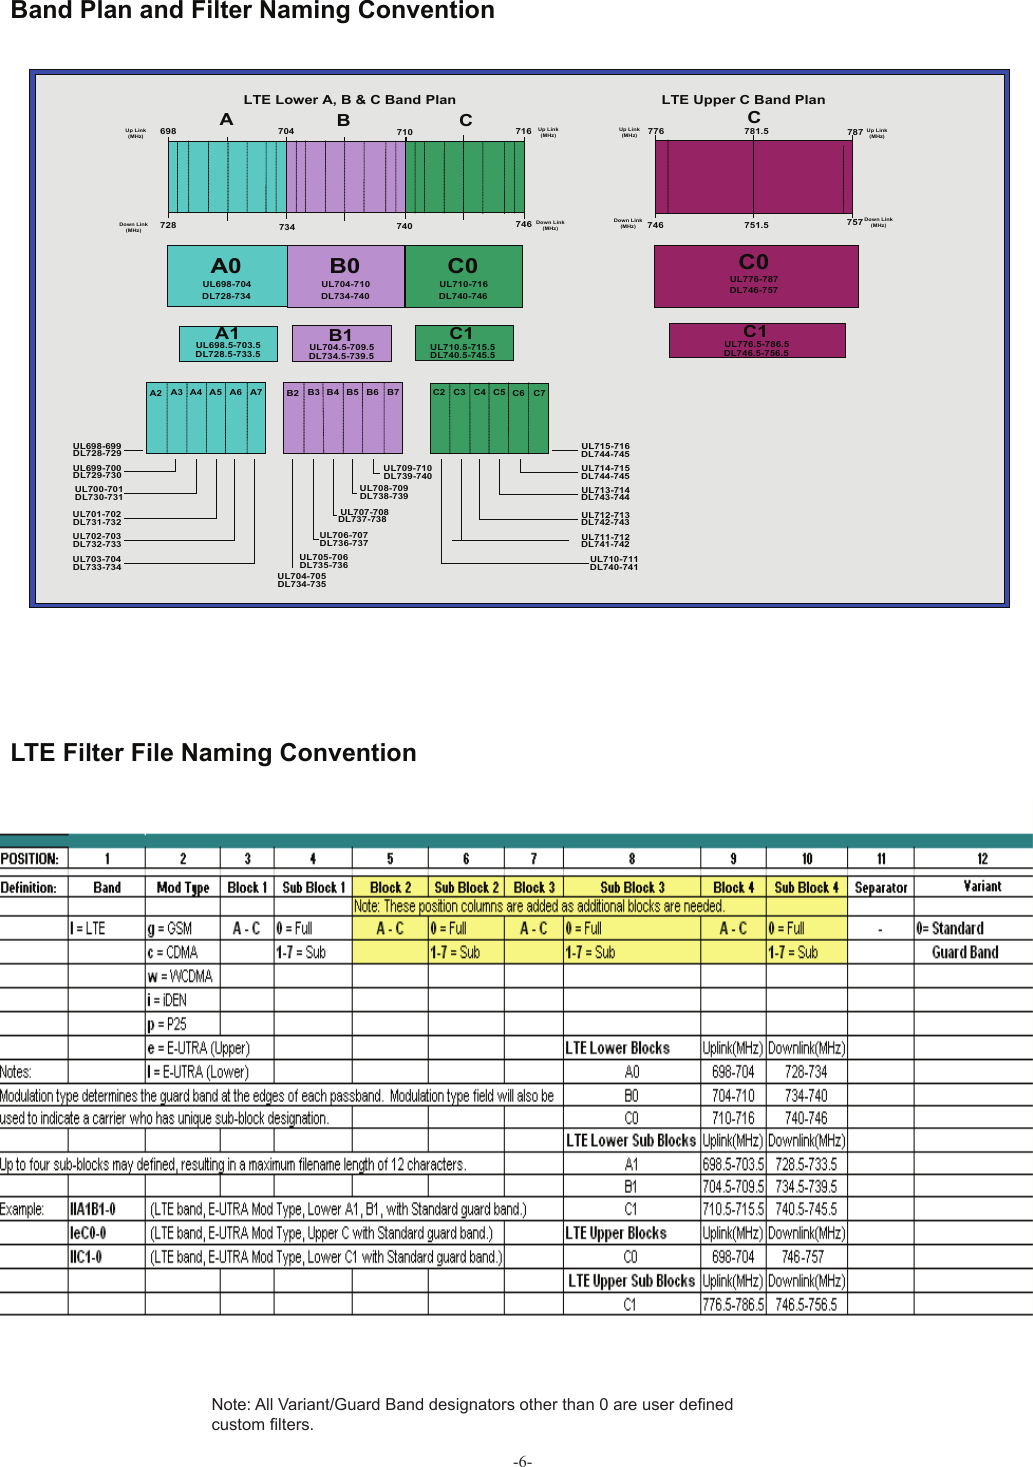 LTE Filter File Naming Convention-6-LTE Lower A, B &amp; C Band PlanUp Link (MHz)Down Link (MHz) 728698A0UL698-704DL728-734B0UL704-710DL734-740A1UL698.5-703.5DL728.5-733.5B1UL704.5-709.5DL734.5-739.5AB704 710734 740Up Link (MHz)Down Link (MHz)A2 A3 A4 A5 A6 A7UL698-699DL728-729UL699-700DL729-730UL700-701DL730-731UL701-702DL731-732UL702-703DL732-733UL703-704DL733-734B2 B3 B4 B5 B6 B7UL704-705DL734-735UL705-706DL735-736UL706-707DL736-737UL707-708DL737-738UL708-709DL738-739UL709-710DL739-740746716CC0UL710-716DL740-746C1UL710.5-715.5DL740.5-745.5C7C6C5C4C3C2UL715-716DL744-745UL714-715DL744-745UL713-714DL743-744UL712-713DL742-743UL711-712DL741-742UL710-711DL740-741LTE Upper C Band PlanUp Link (MHz)Down Link (MHz) 746776C0UL776-787DL746-757C1UL776.5-786.5DL746.5-756.5C787757Up Link (MHz)Down Link (MHz)781.5751.5Note: All Variant/Guard Band designators other than 0 are user deﬁ ned custom ﬁ lters.Band Plan and Filter Naming Convention